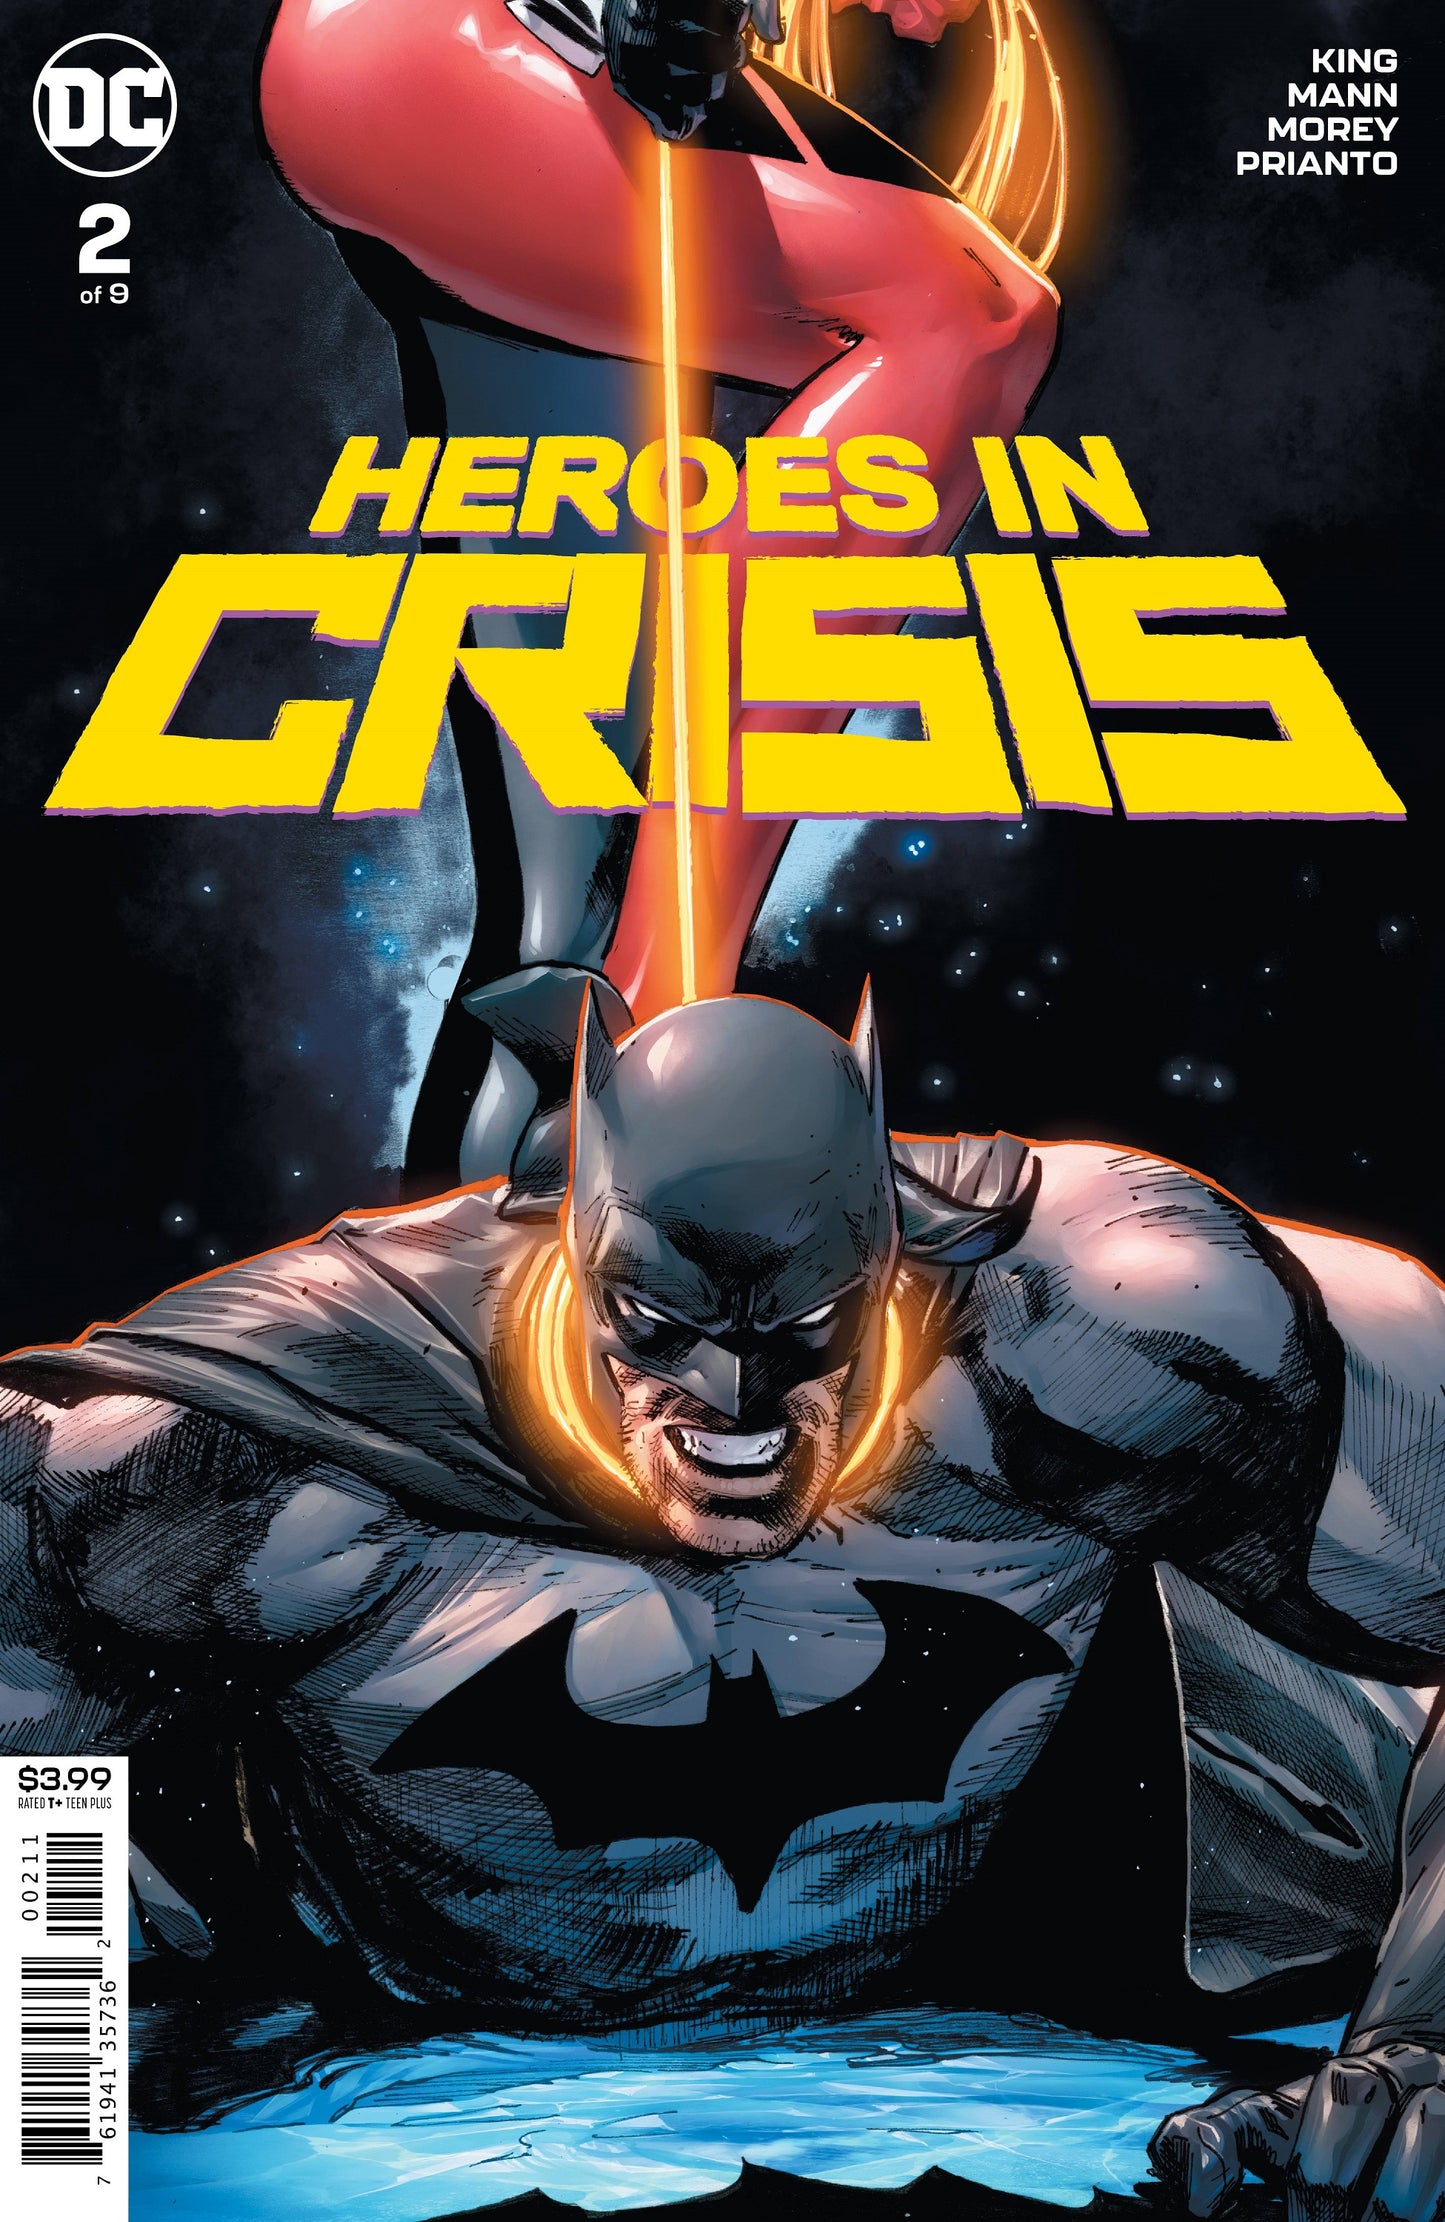 HEROES IN CRISIS #2 (OF 7) DC Clay Mann Tom King (10/24/2018)